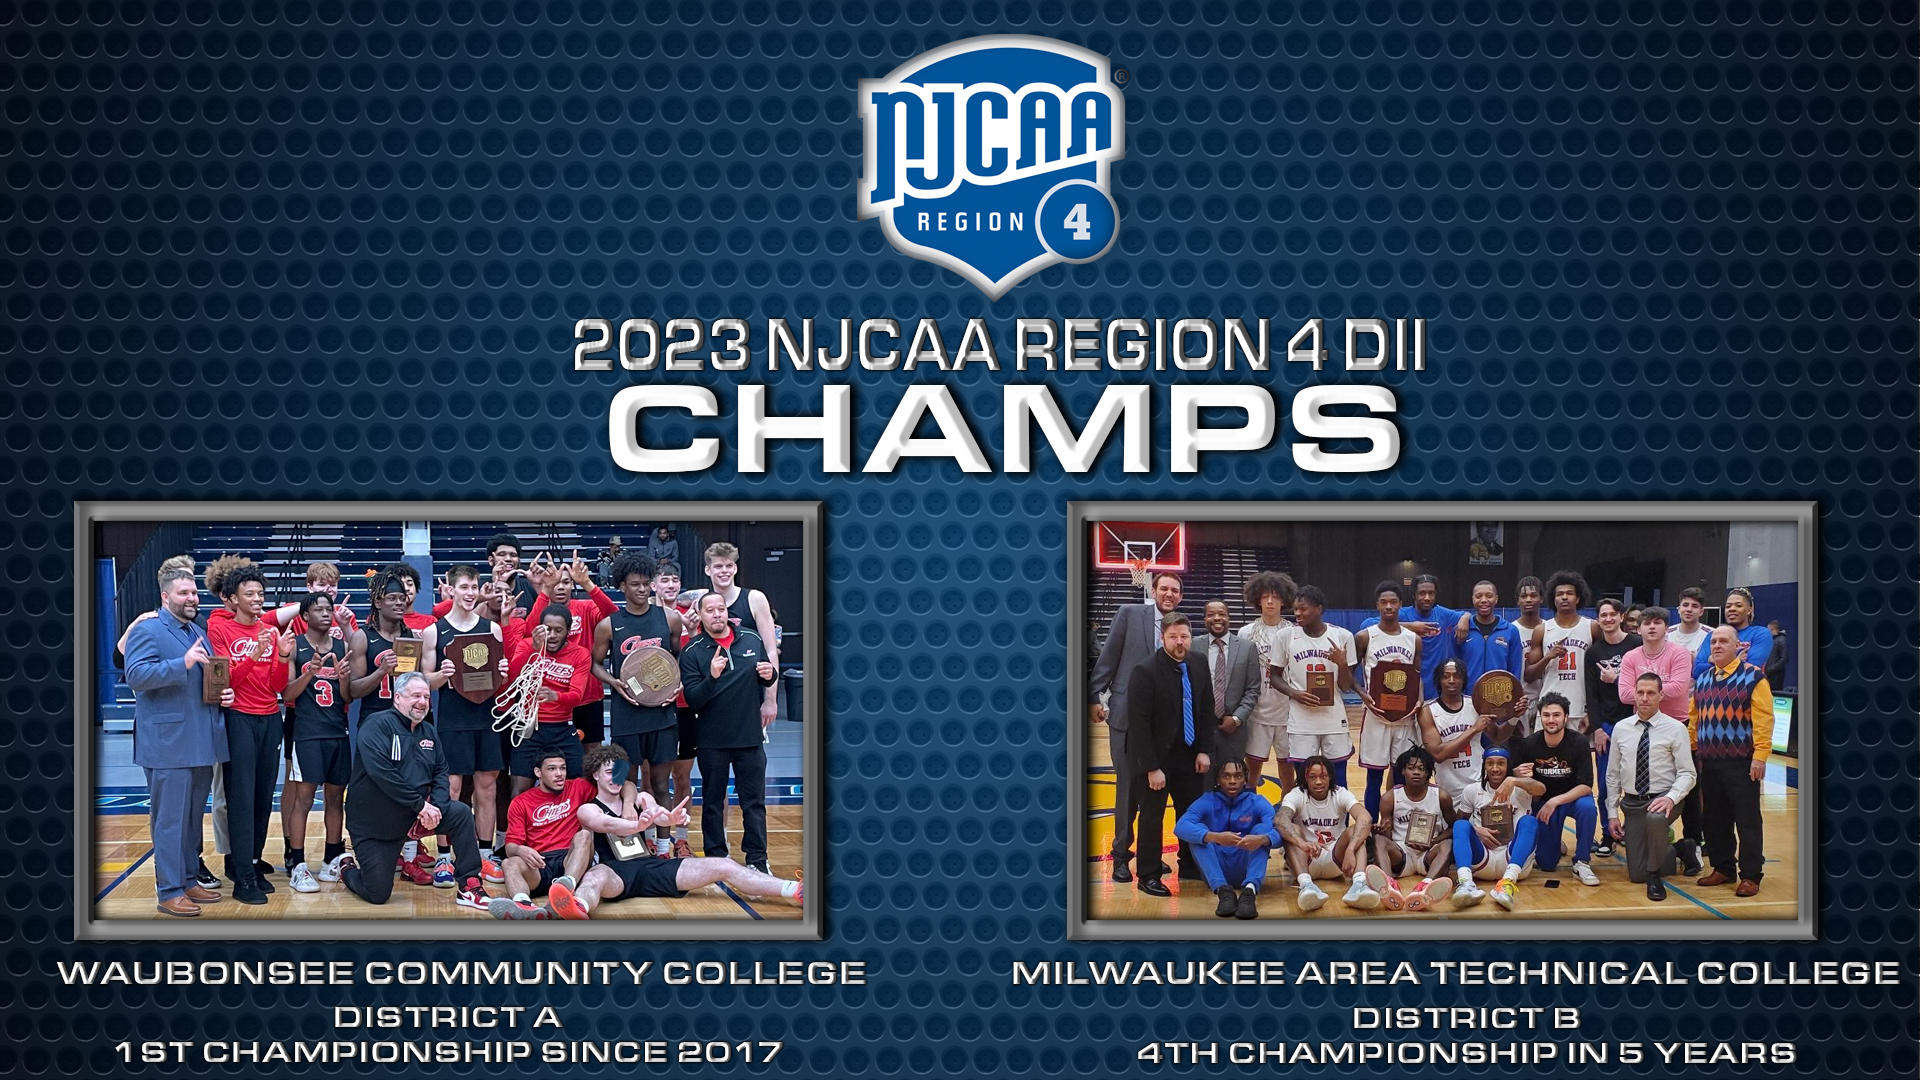 (Images courtesy of Waubonsee Community College Athletics & Milwaukee Area Technical College Athletics)